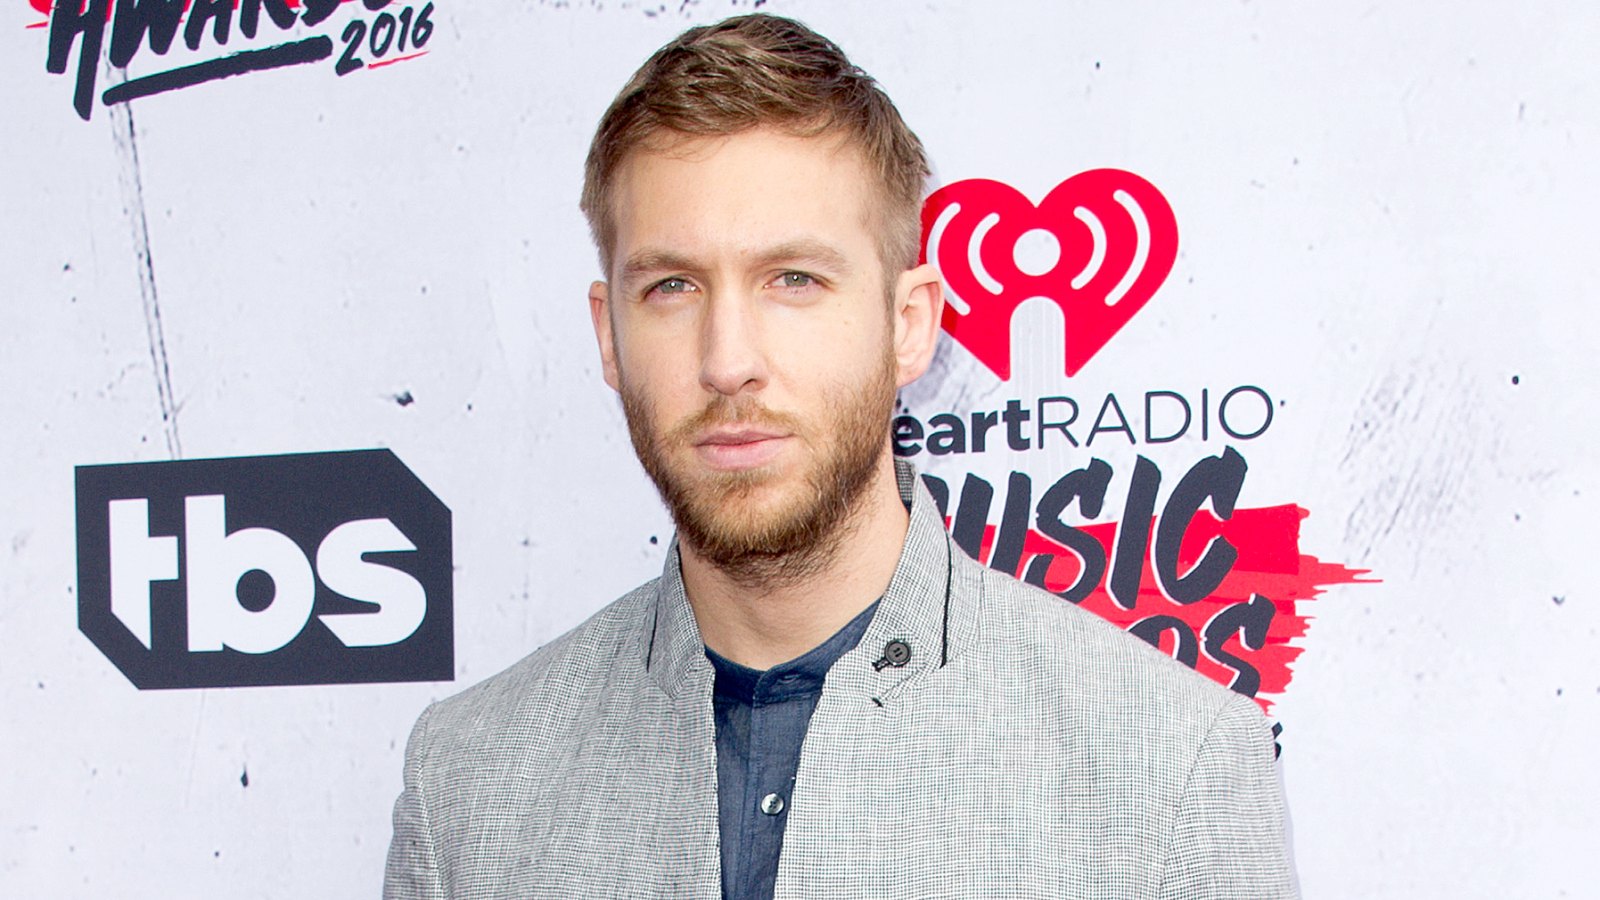 Calvin Harris arrives at the iHeartRadio Music Awards at The Forum on April 3, 2016 in Inglewood, California.